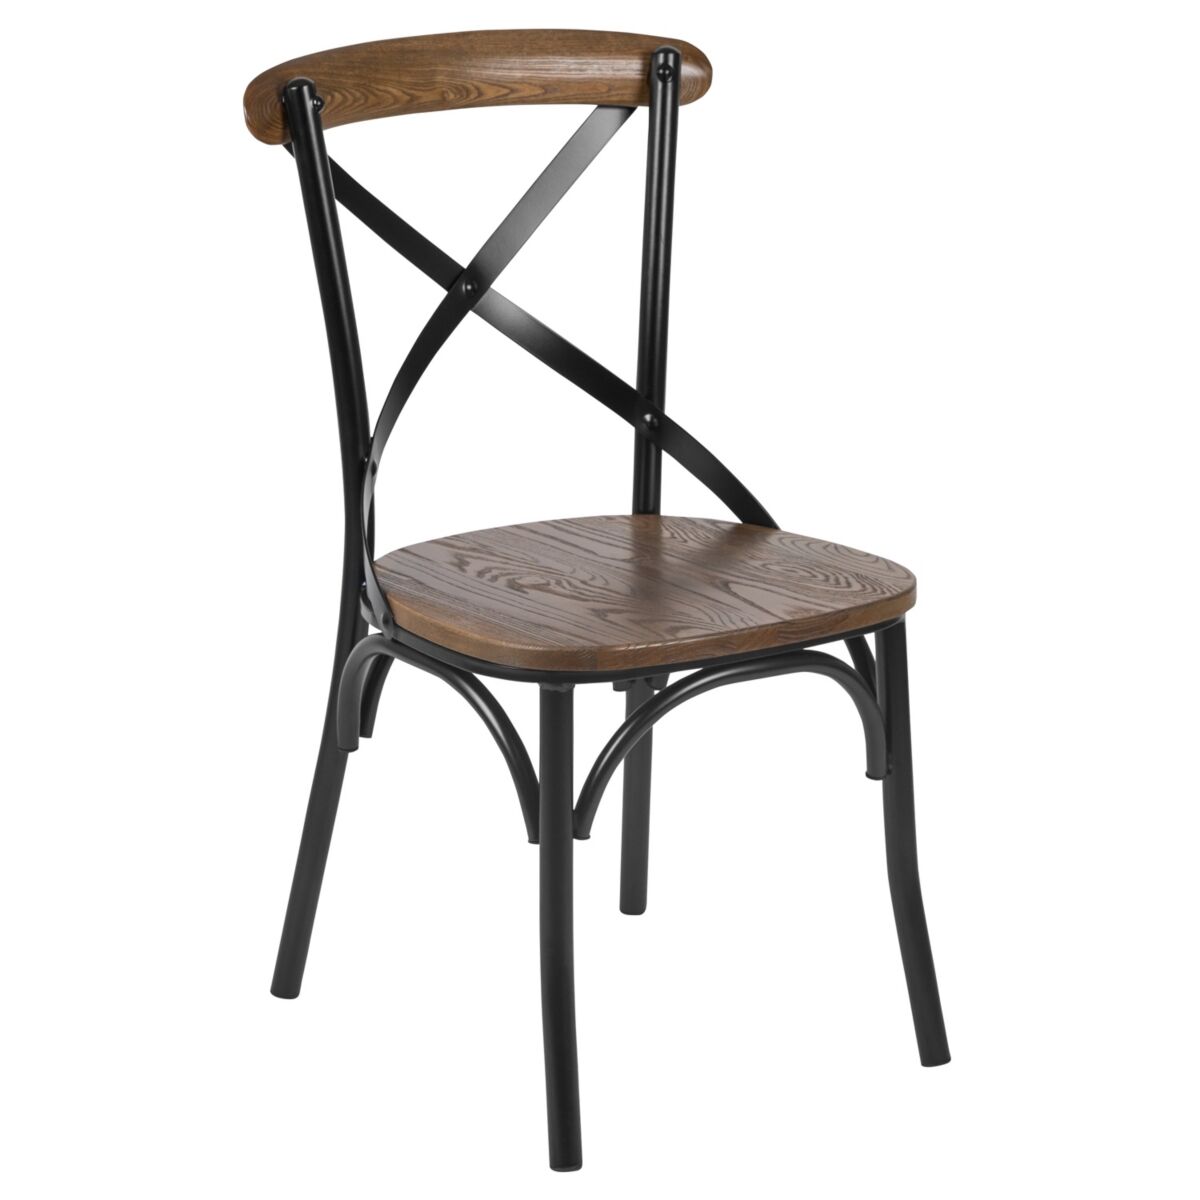 Merrick Lane Tucker Series Industrial Style Black Metal X-Back Dining Chair With Fruitwood Finished Seat And Back - Black/fruitwood